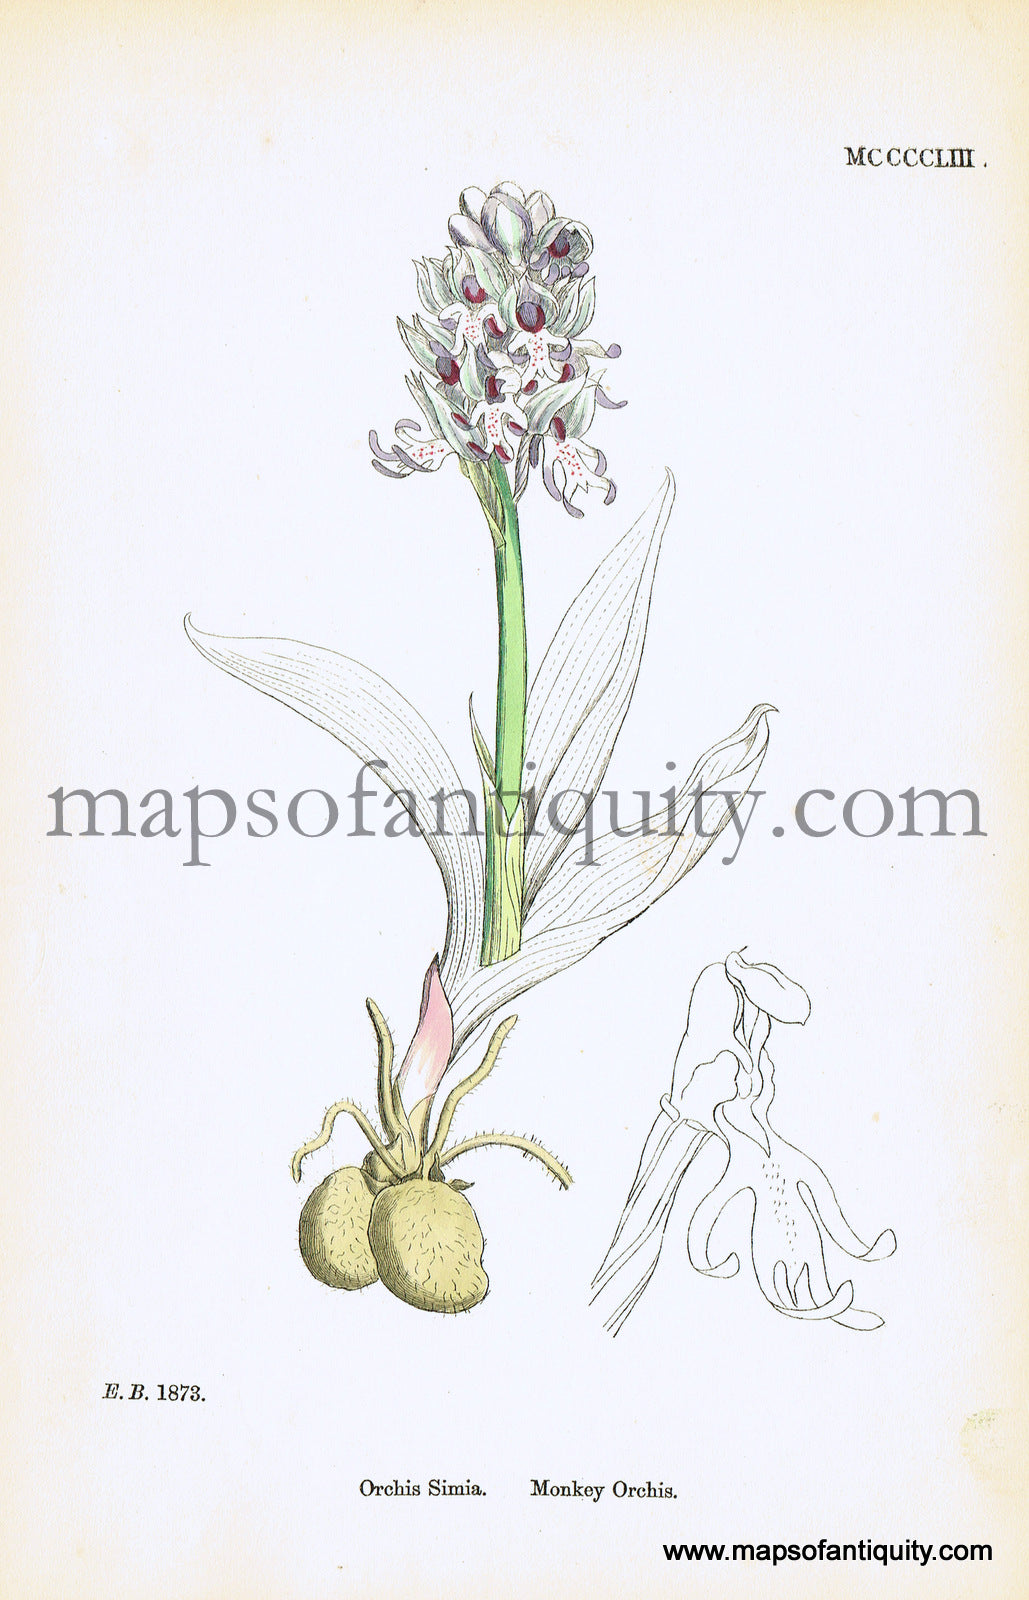 Antique-Hand-Colored-Print-Orchis-simia-Antique-Prints-Natural-History-Botanical-c.-1860-Sowerby-Maps-Of-Antiquity